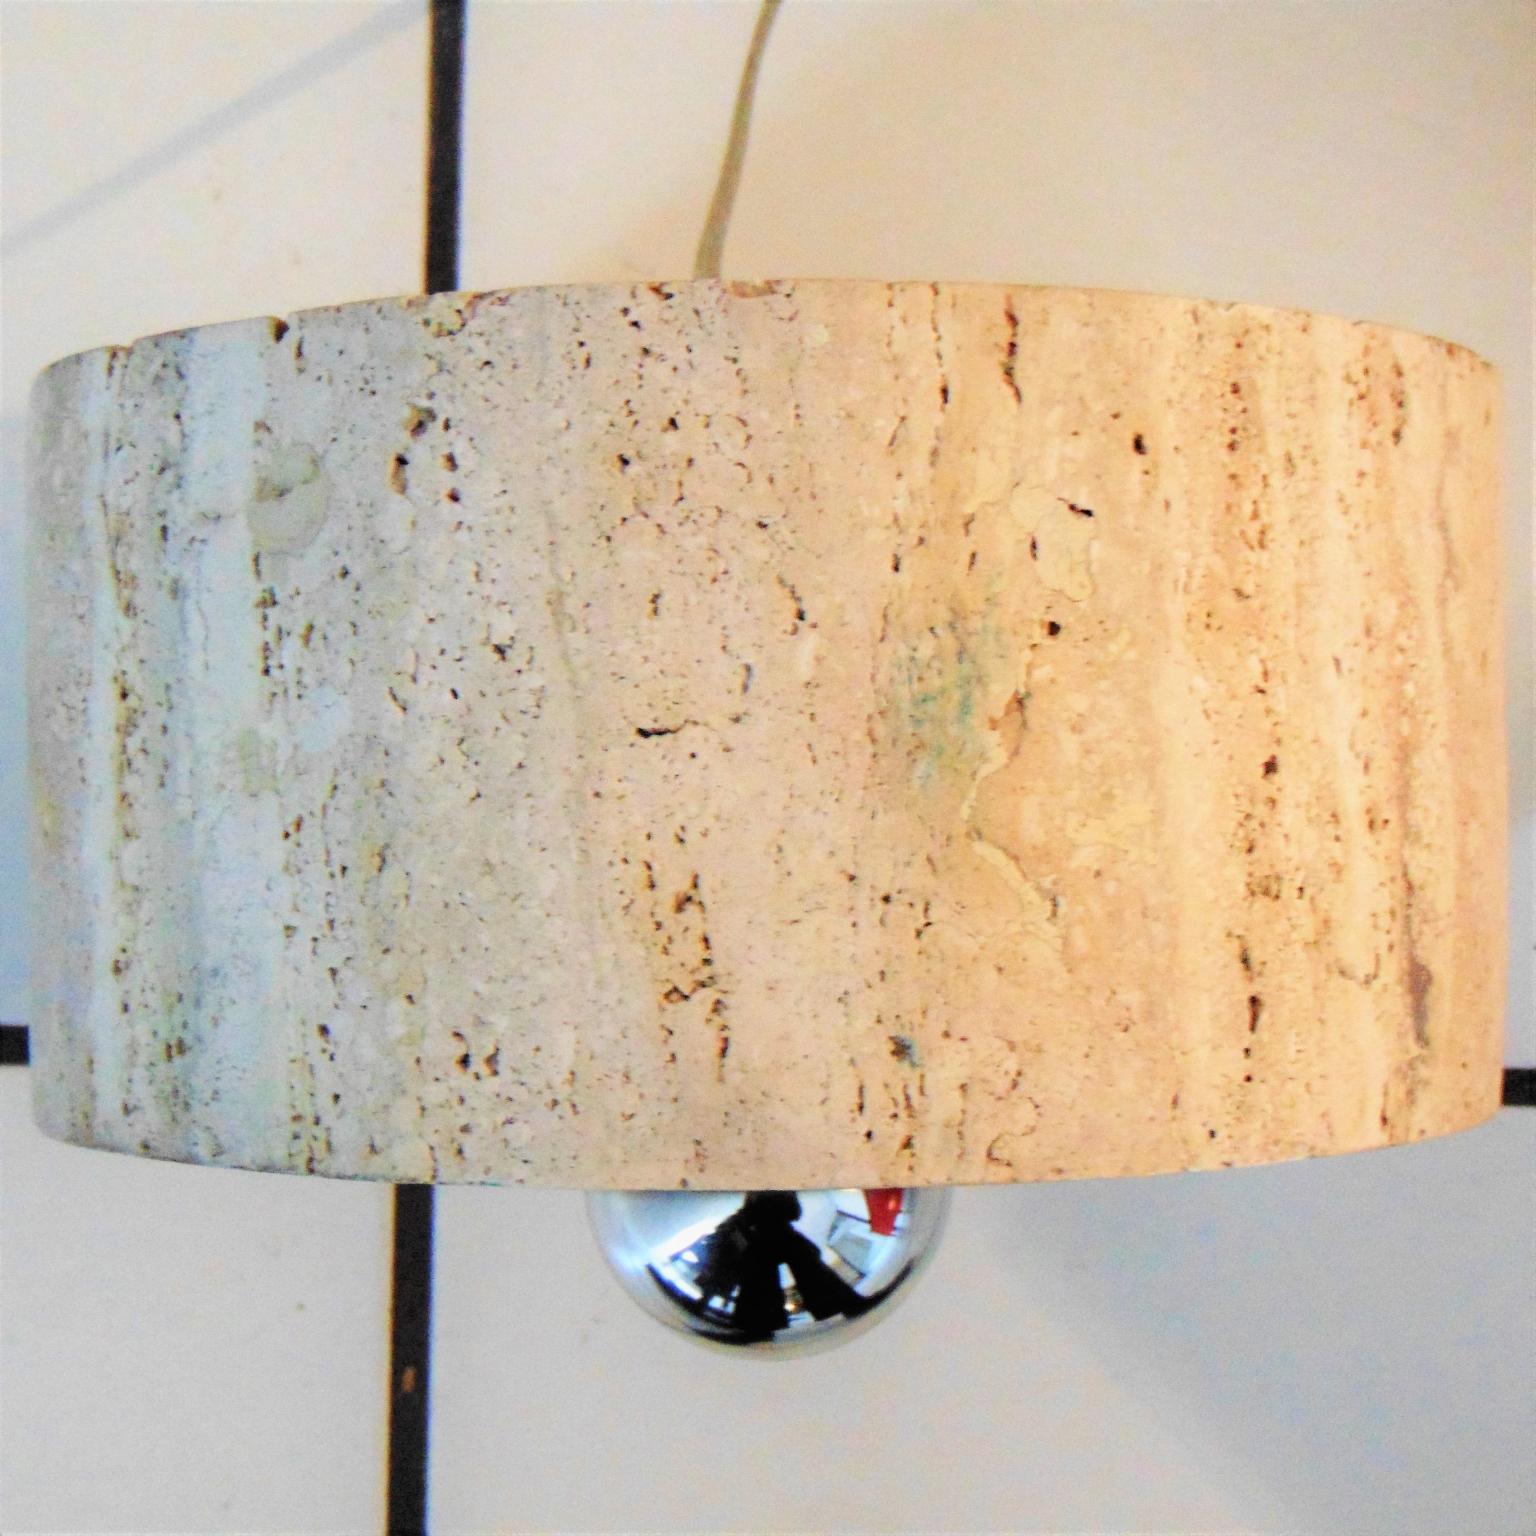 Sormani Nucleo Set of 2 Table Lamps in Travertine by G. Cesari, 1970s, Italy For Sale 9